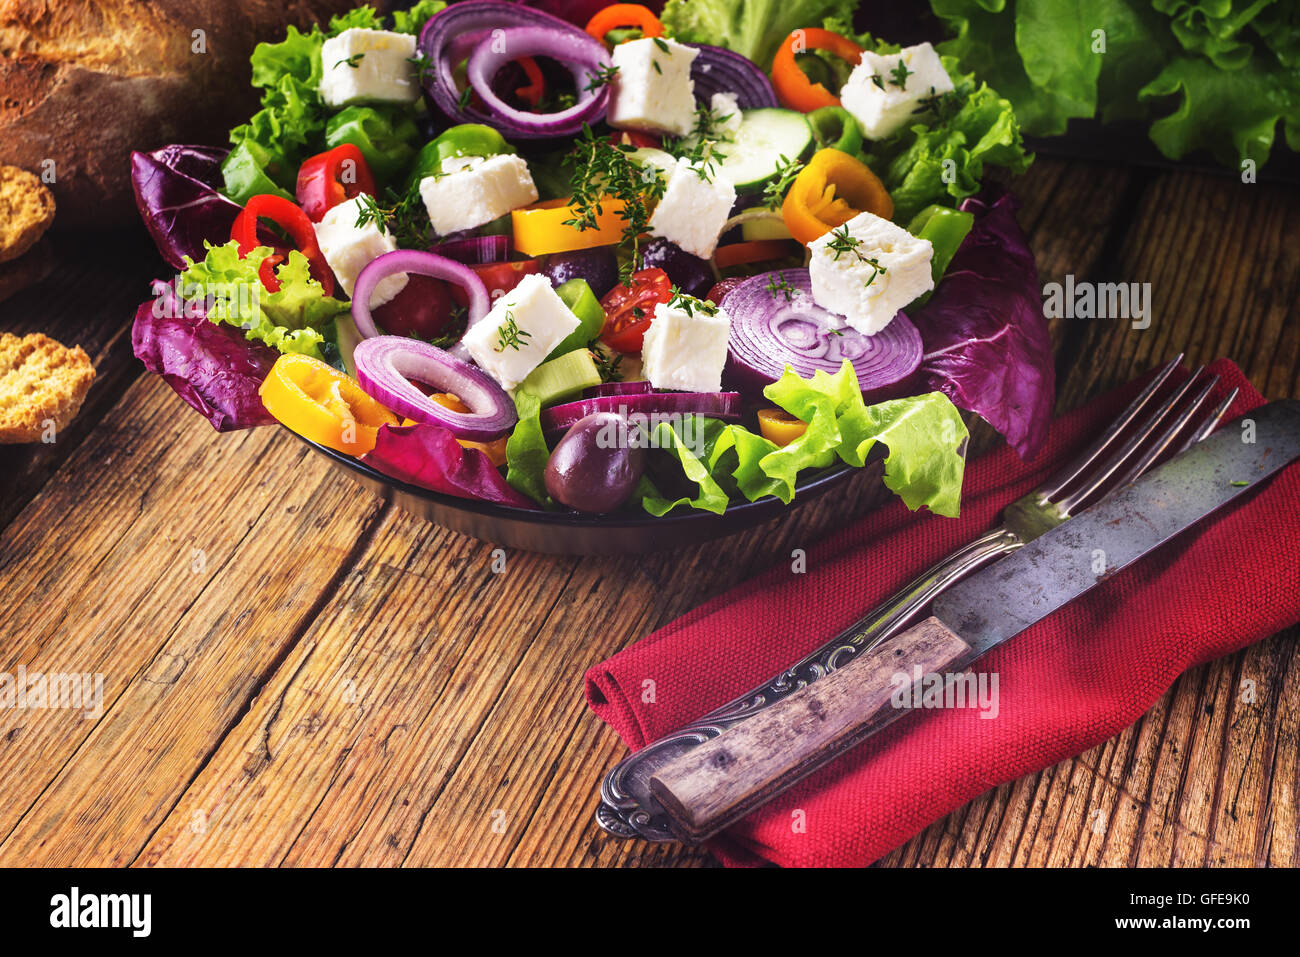 Crisp spring salad with feta cheese, full of vitamins and colors. Greec Salad on vintage table Stock Photo